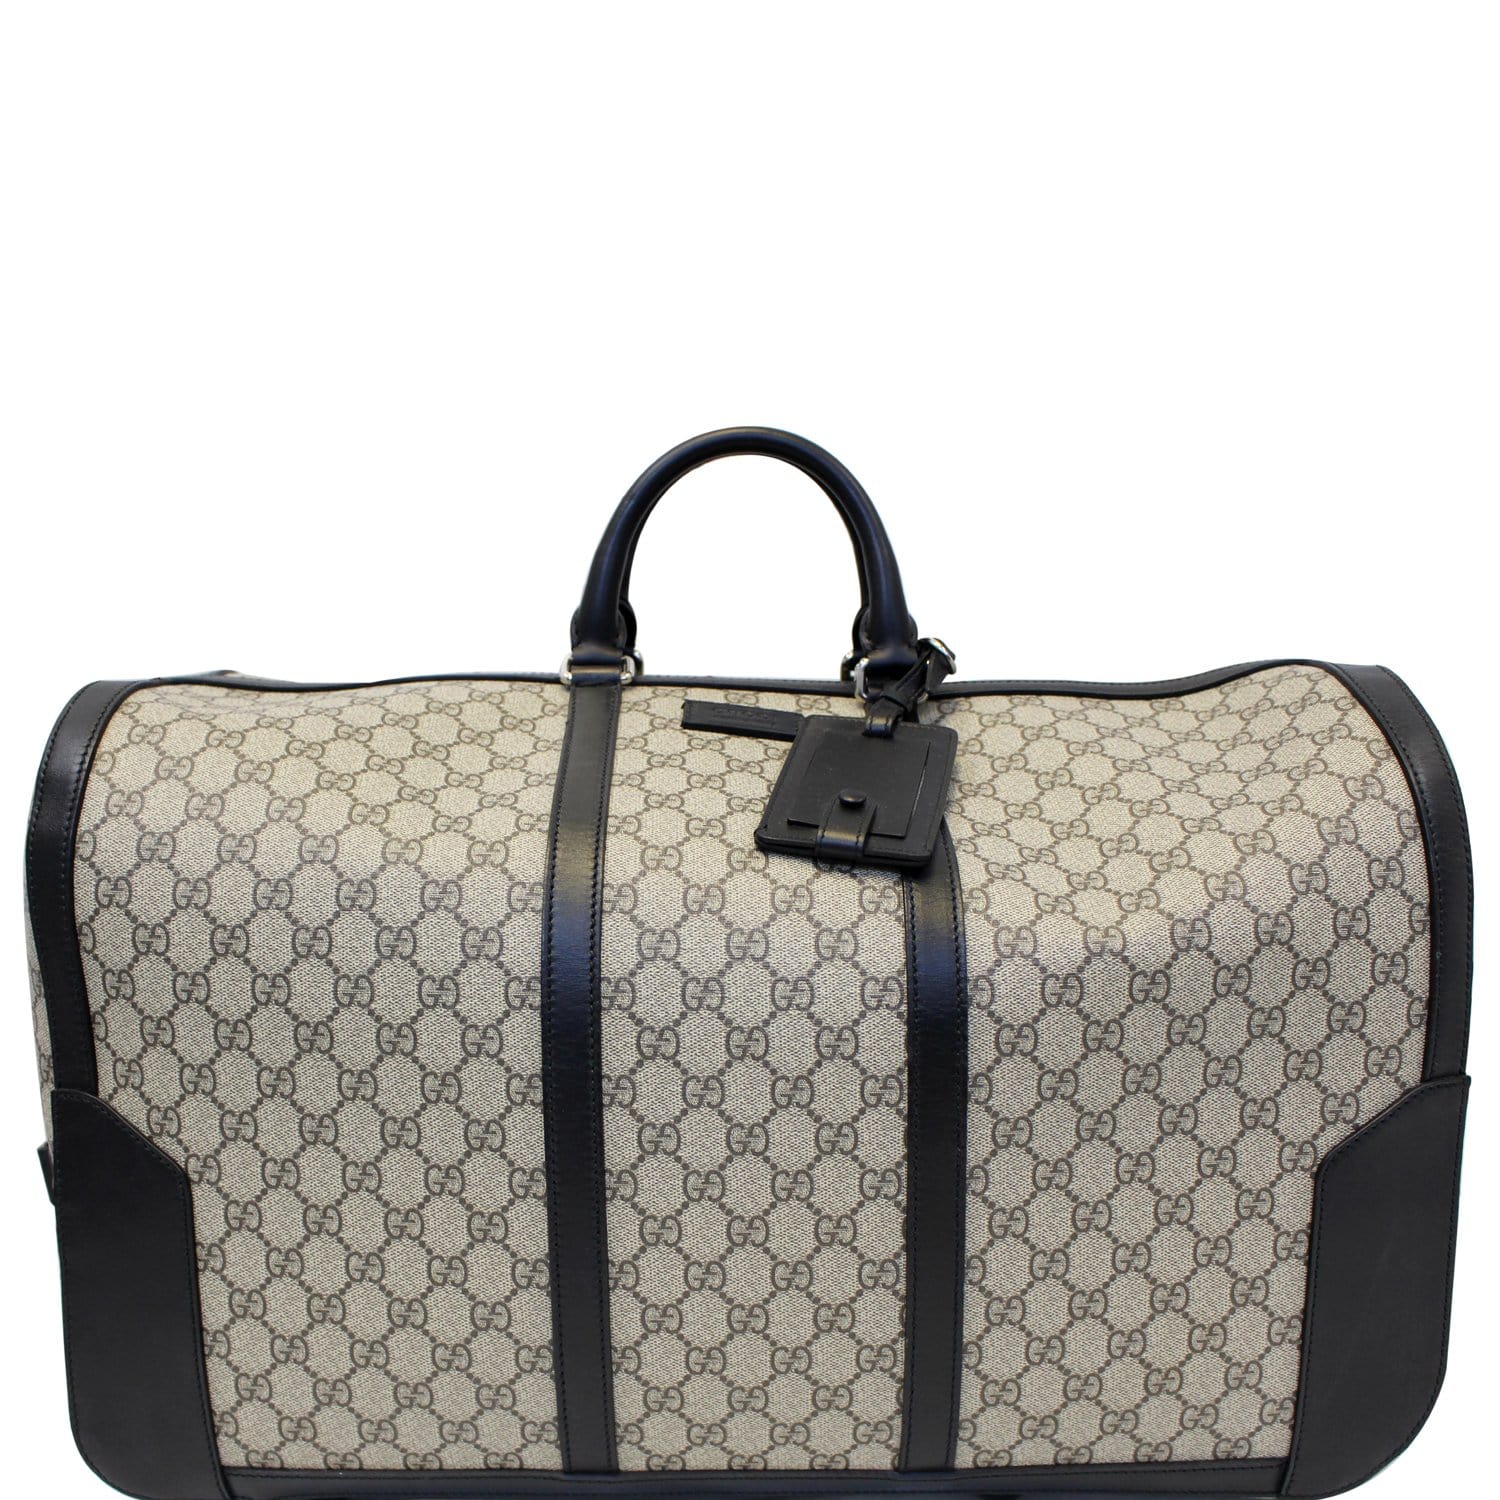 GUCCI GG Supreme Duffle Carry-on Bag 406382 Beige-US